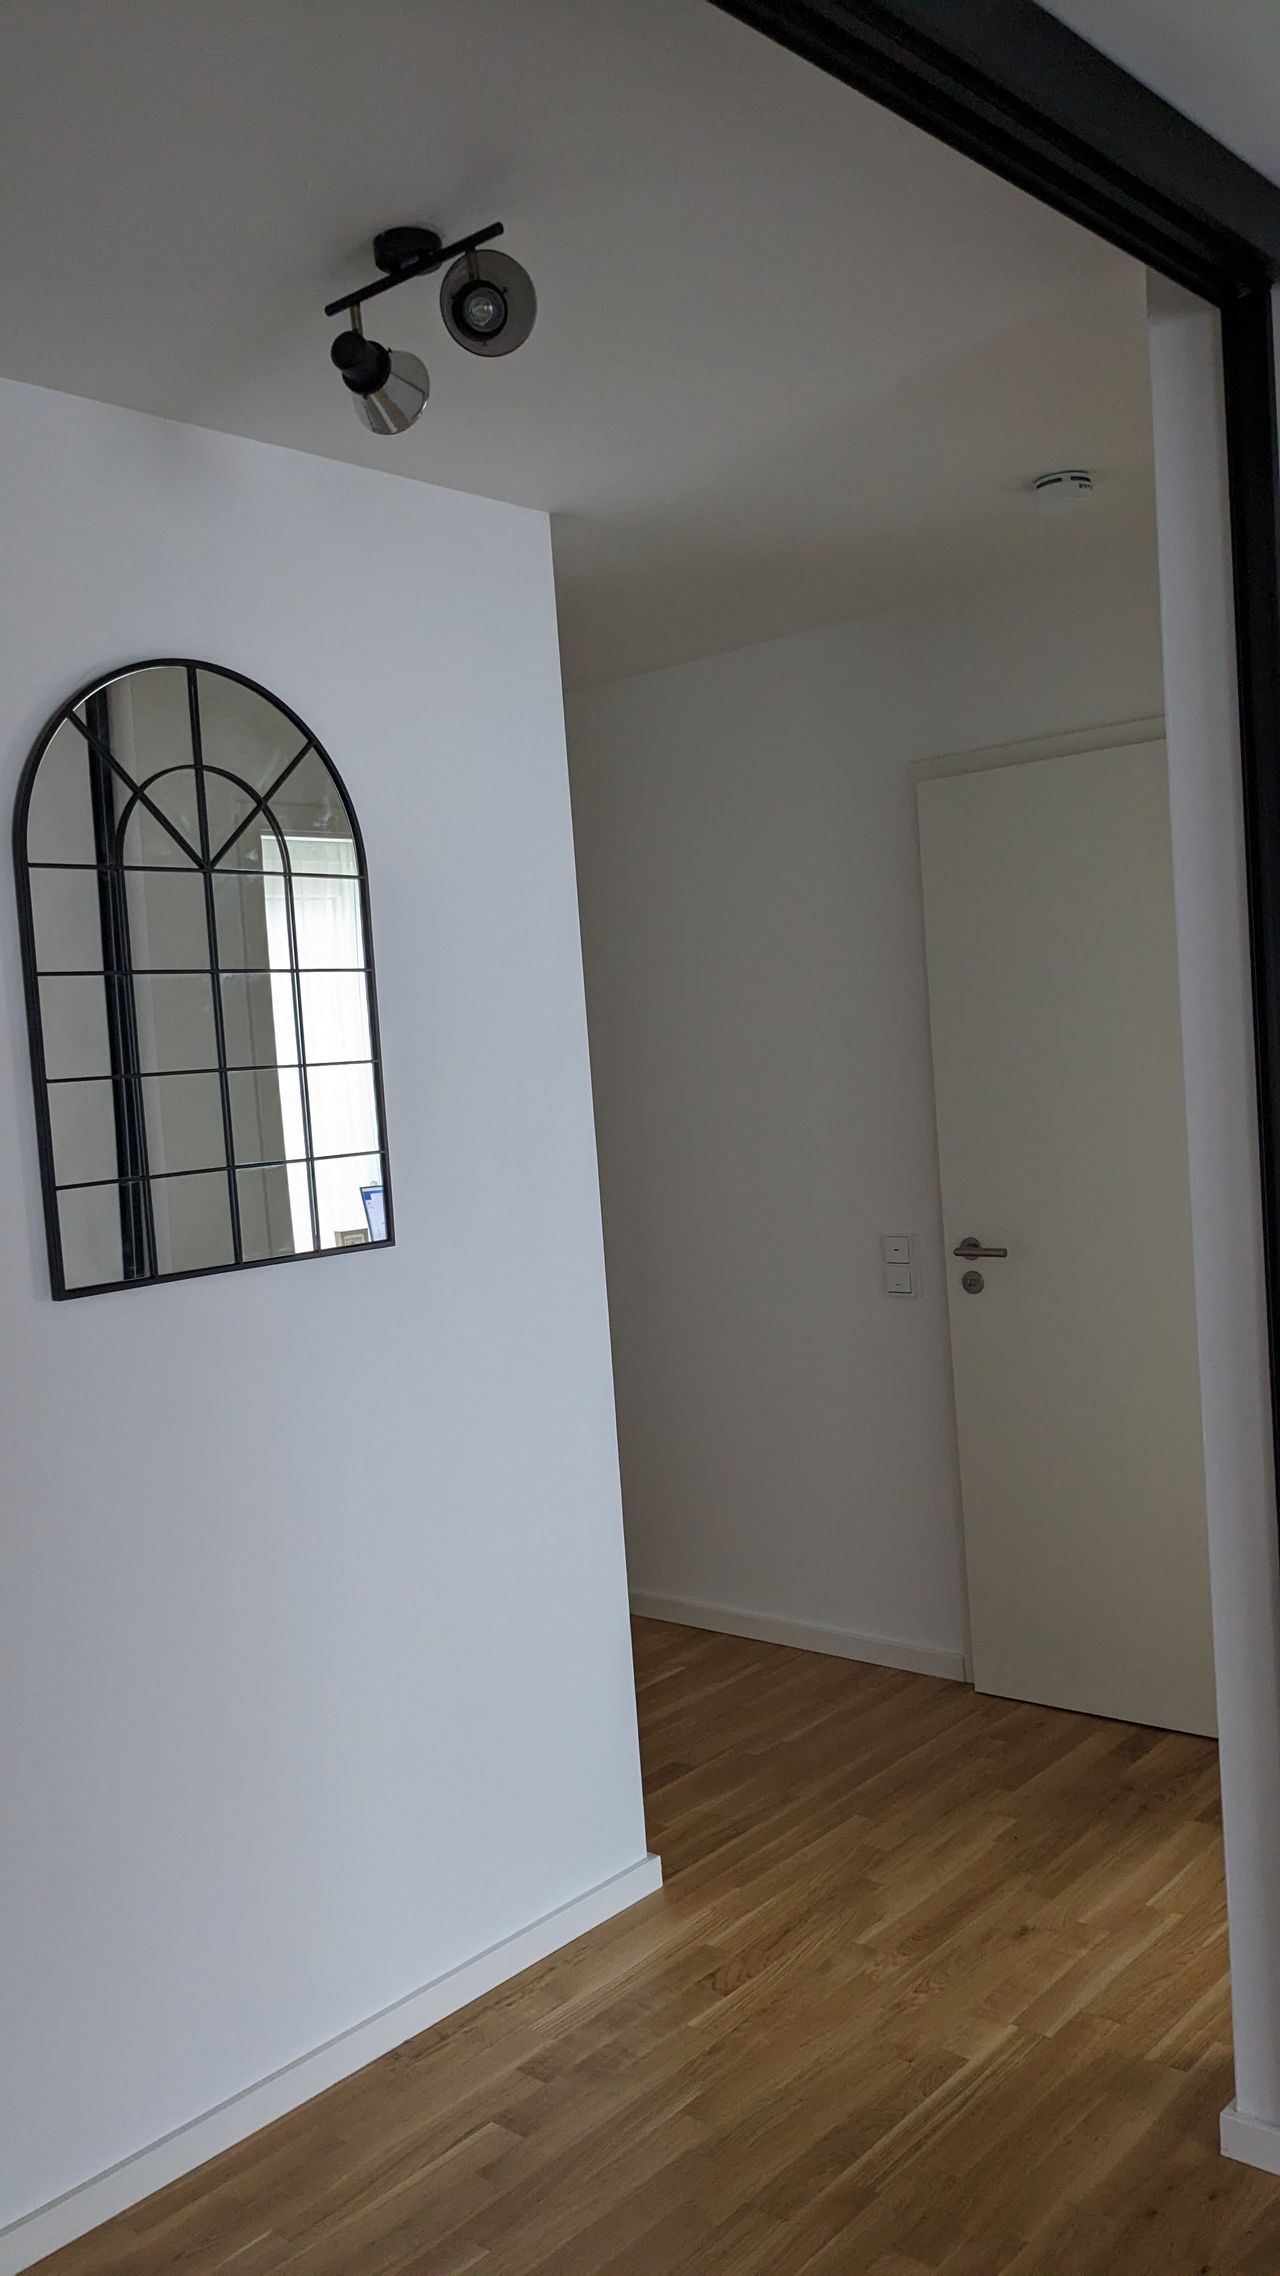 Lovely flat between City and Airport. Close to Kreuzberg or to Tesla fabric.